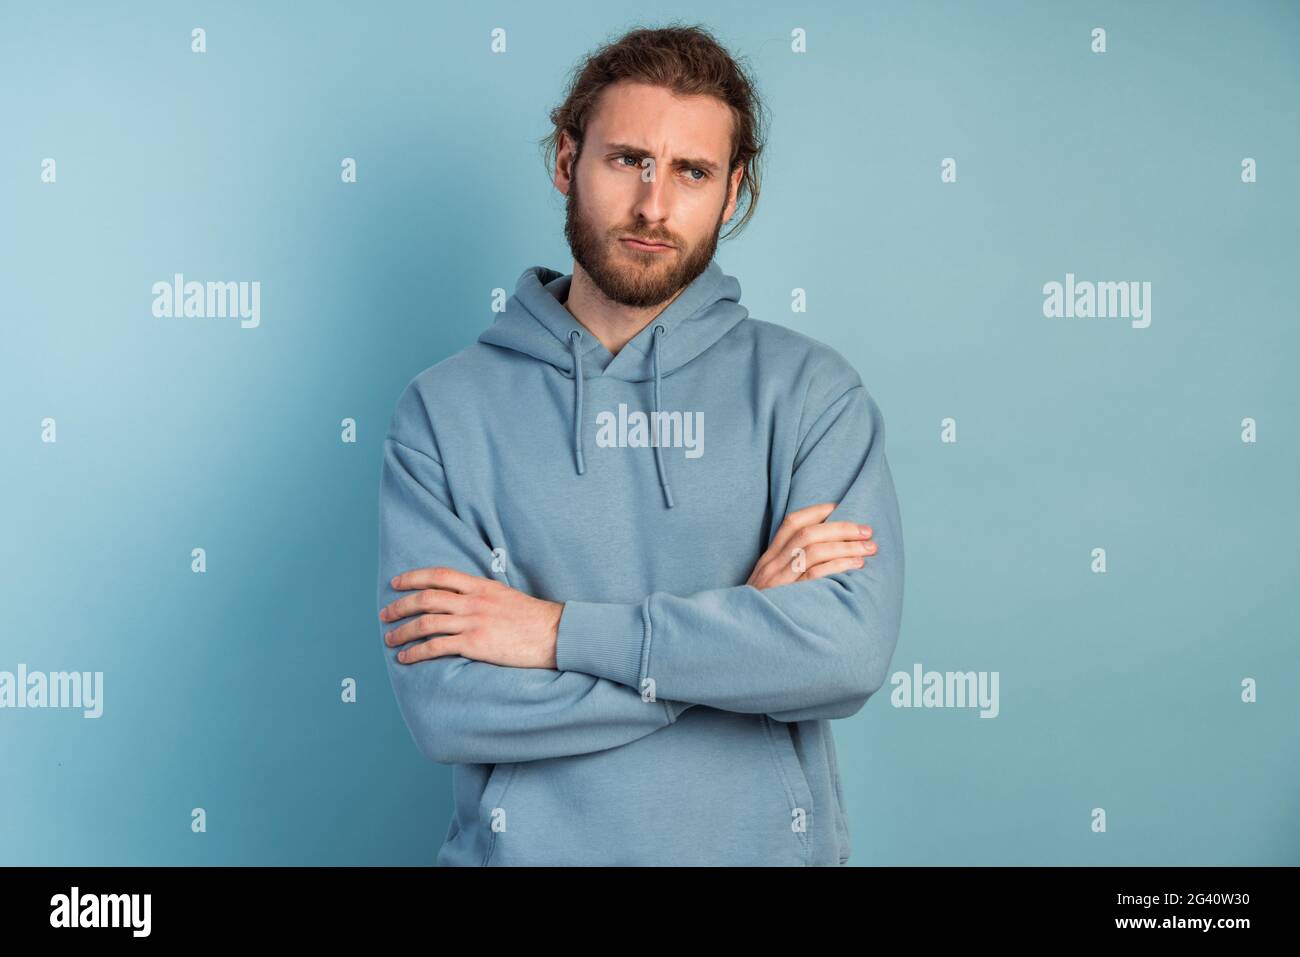 Photo of an upset man in a hooded sweater, he crossed his arms over his chest. Man posing on a blue background. Stock Photo